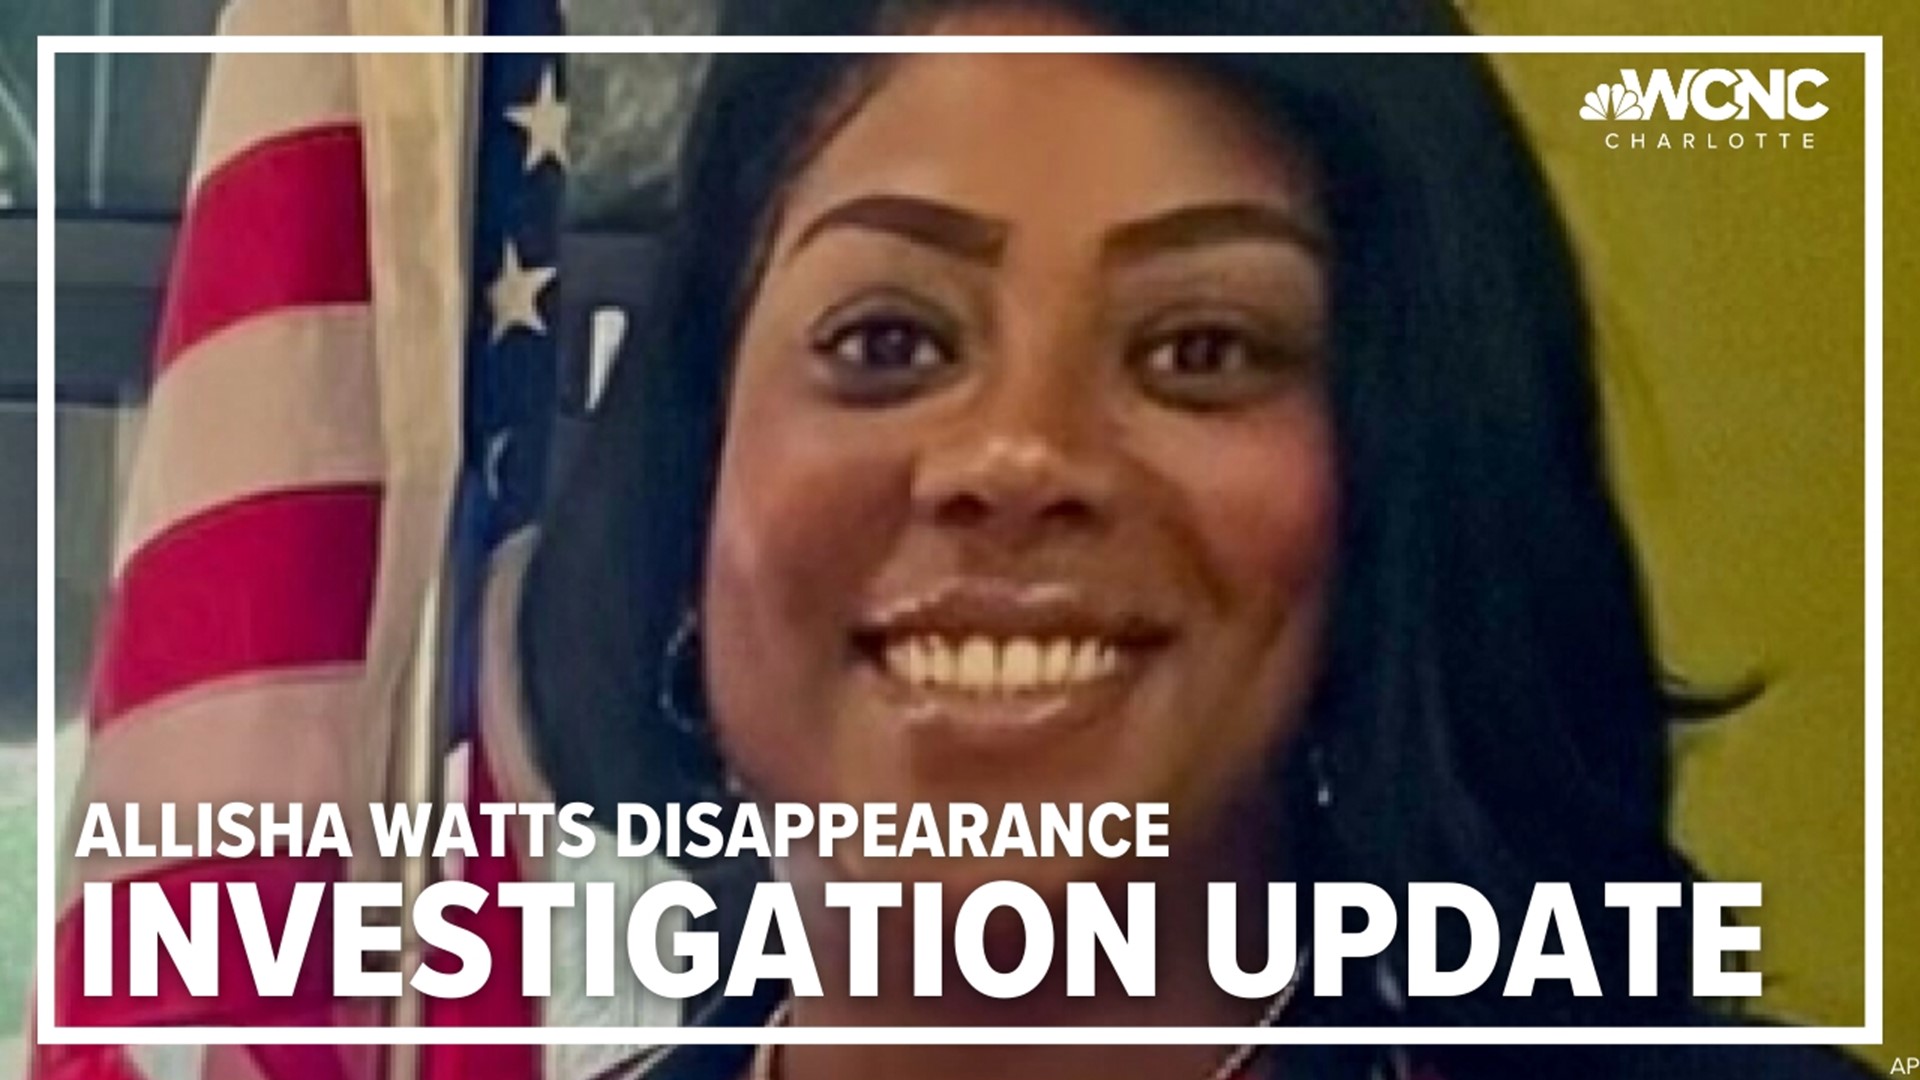 Police spoke briefly about their investigation on Allisha Watts, a Moore County woman who went missing after traveling to Charlotte last month.